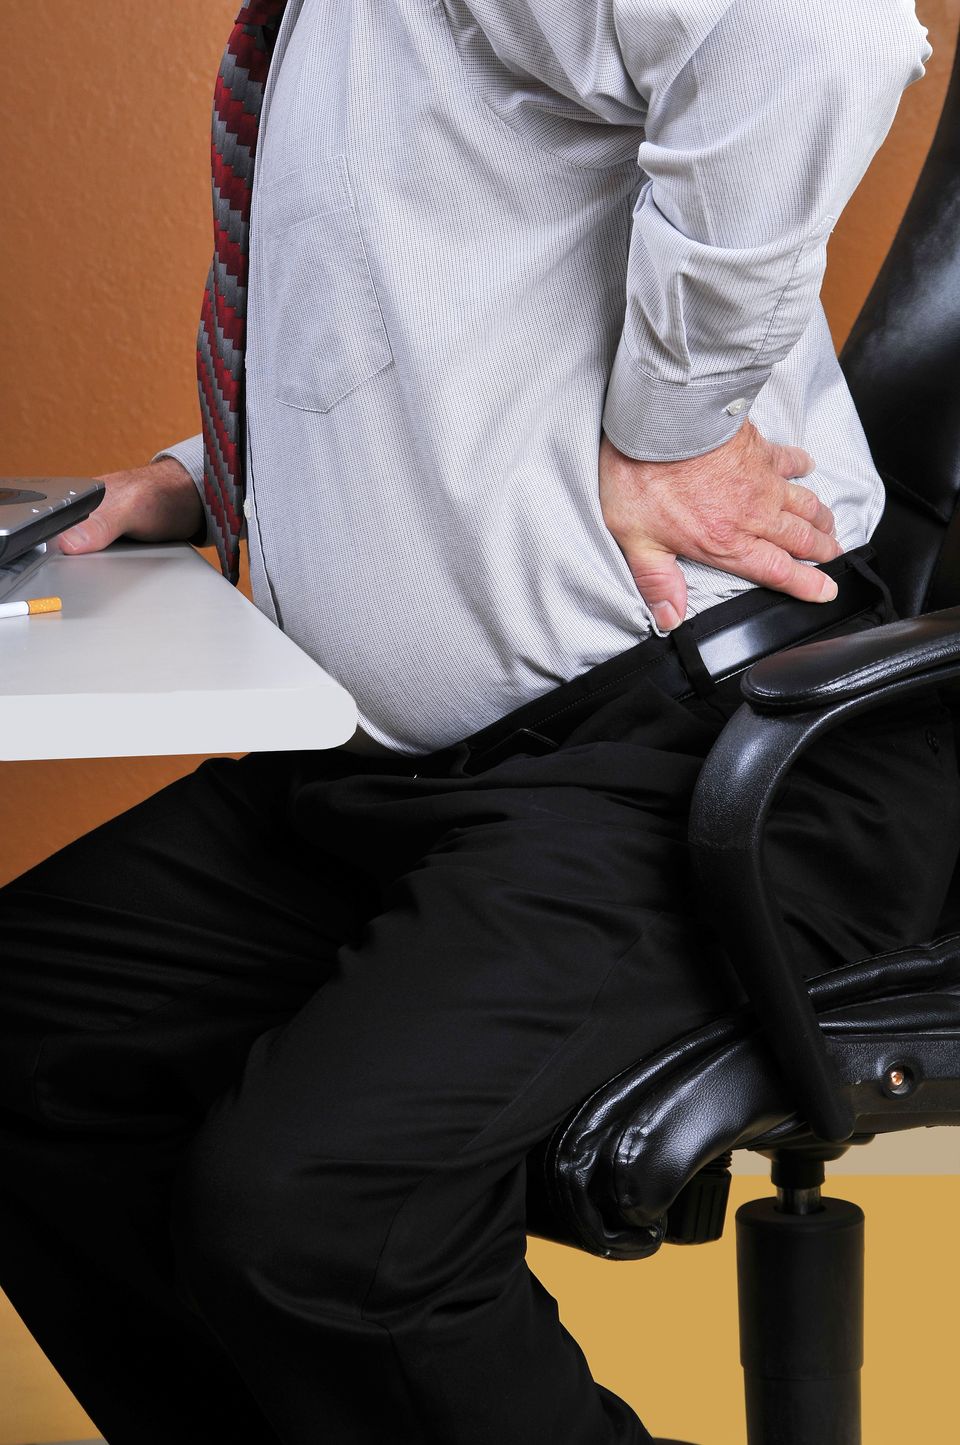 Your Desk Set Up Is Causing Back Pain